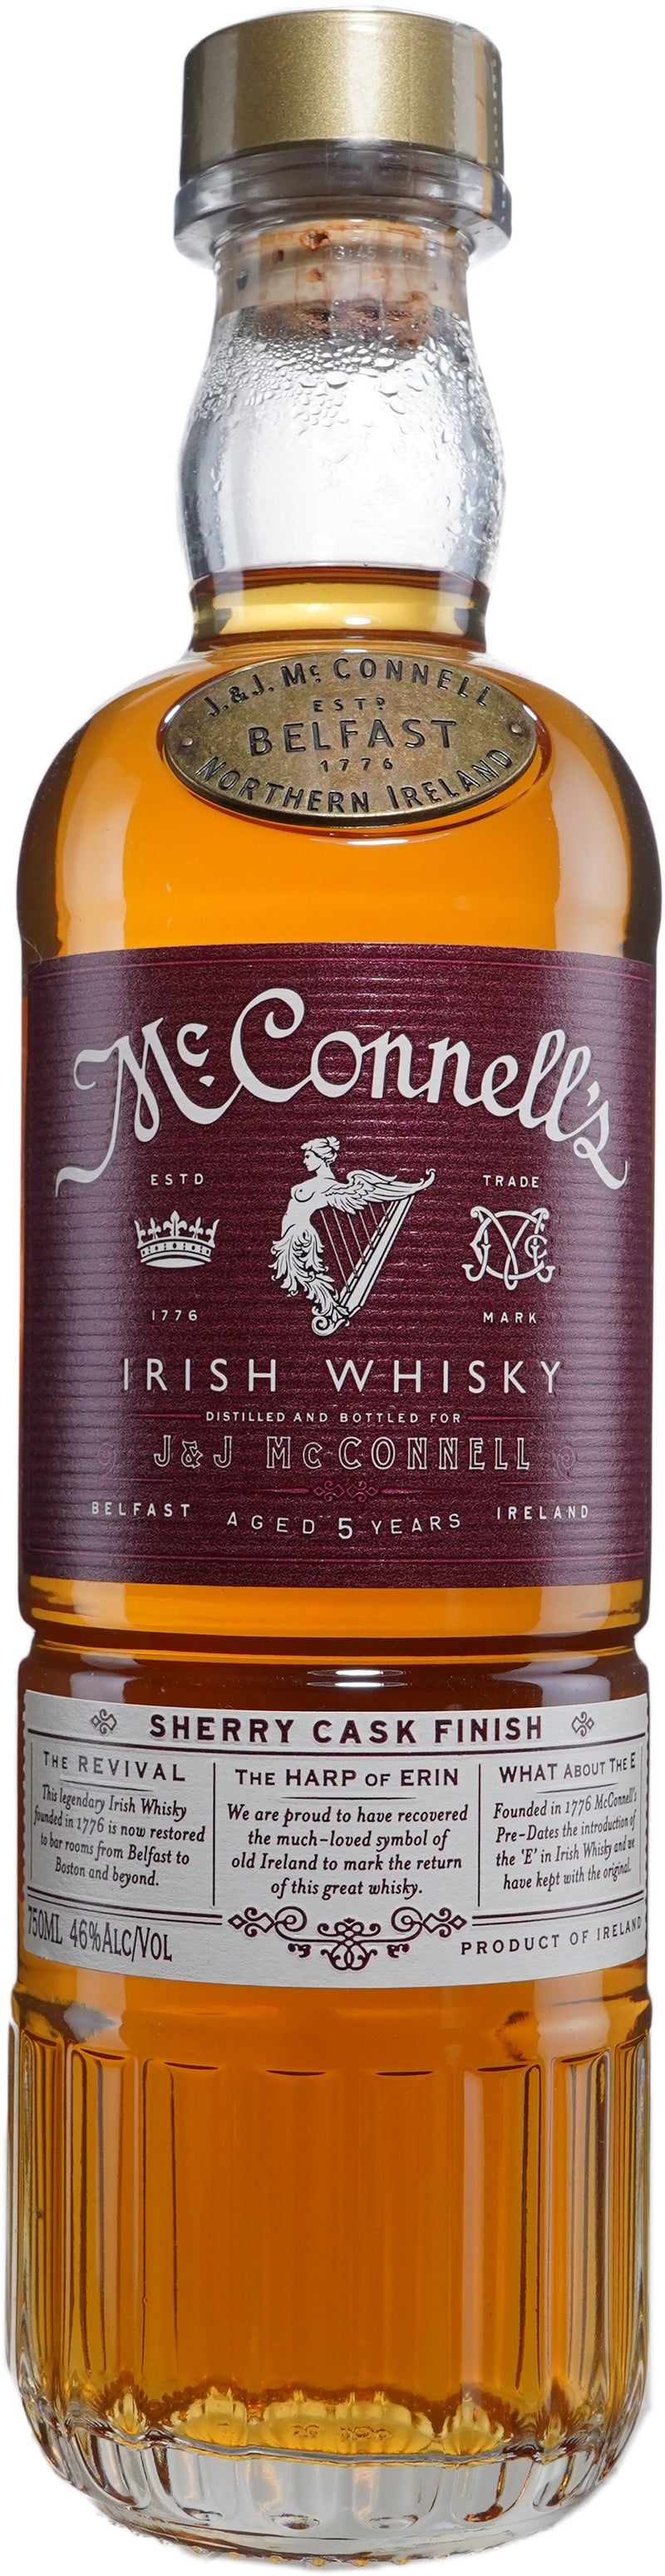 BUY] McConnell's Sherry Cask Irish Whiskey at